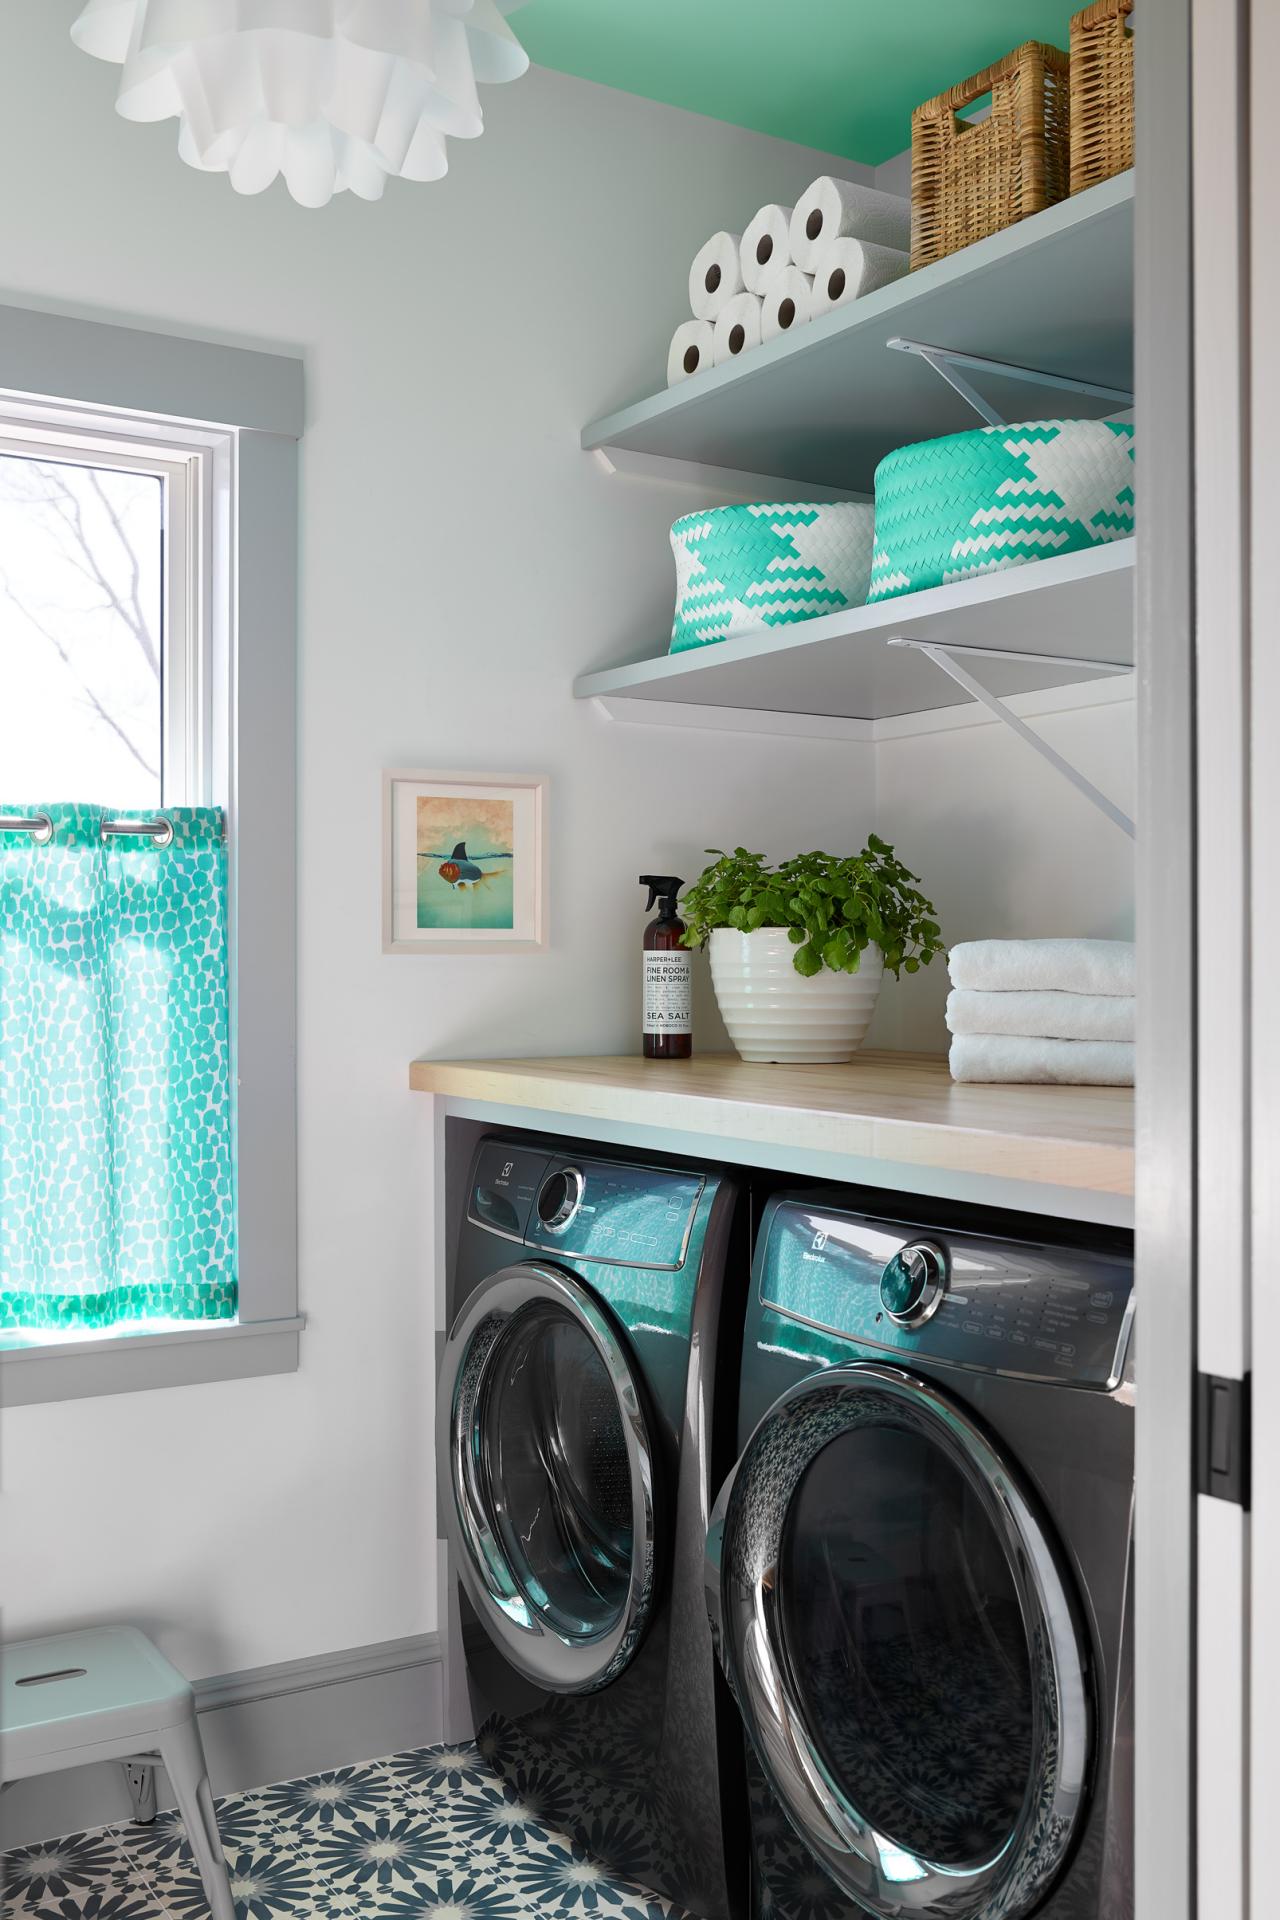 How To Sort Your Laundry In Style - Cool Laundry Basket Holder Ideas